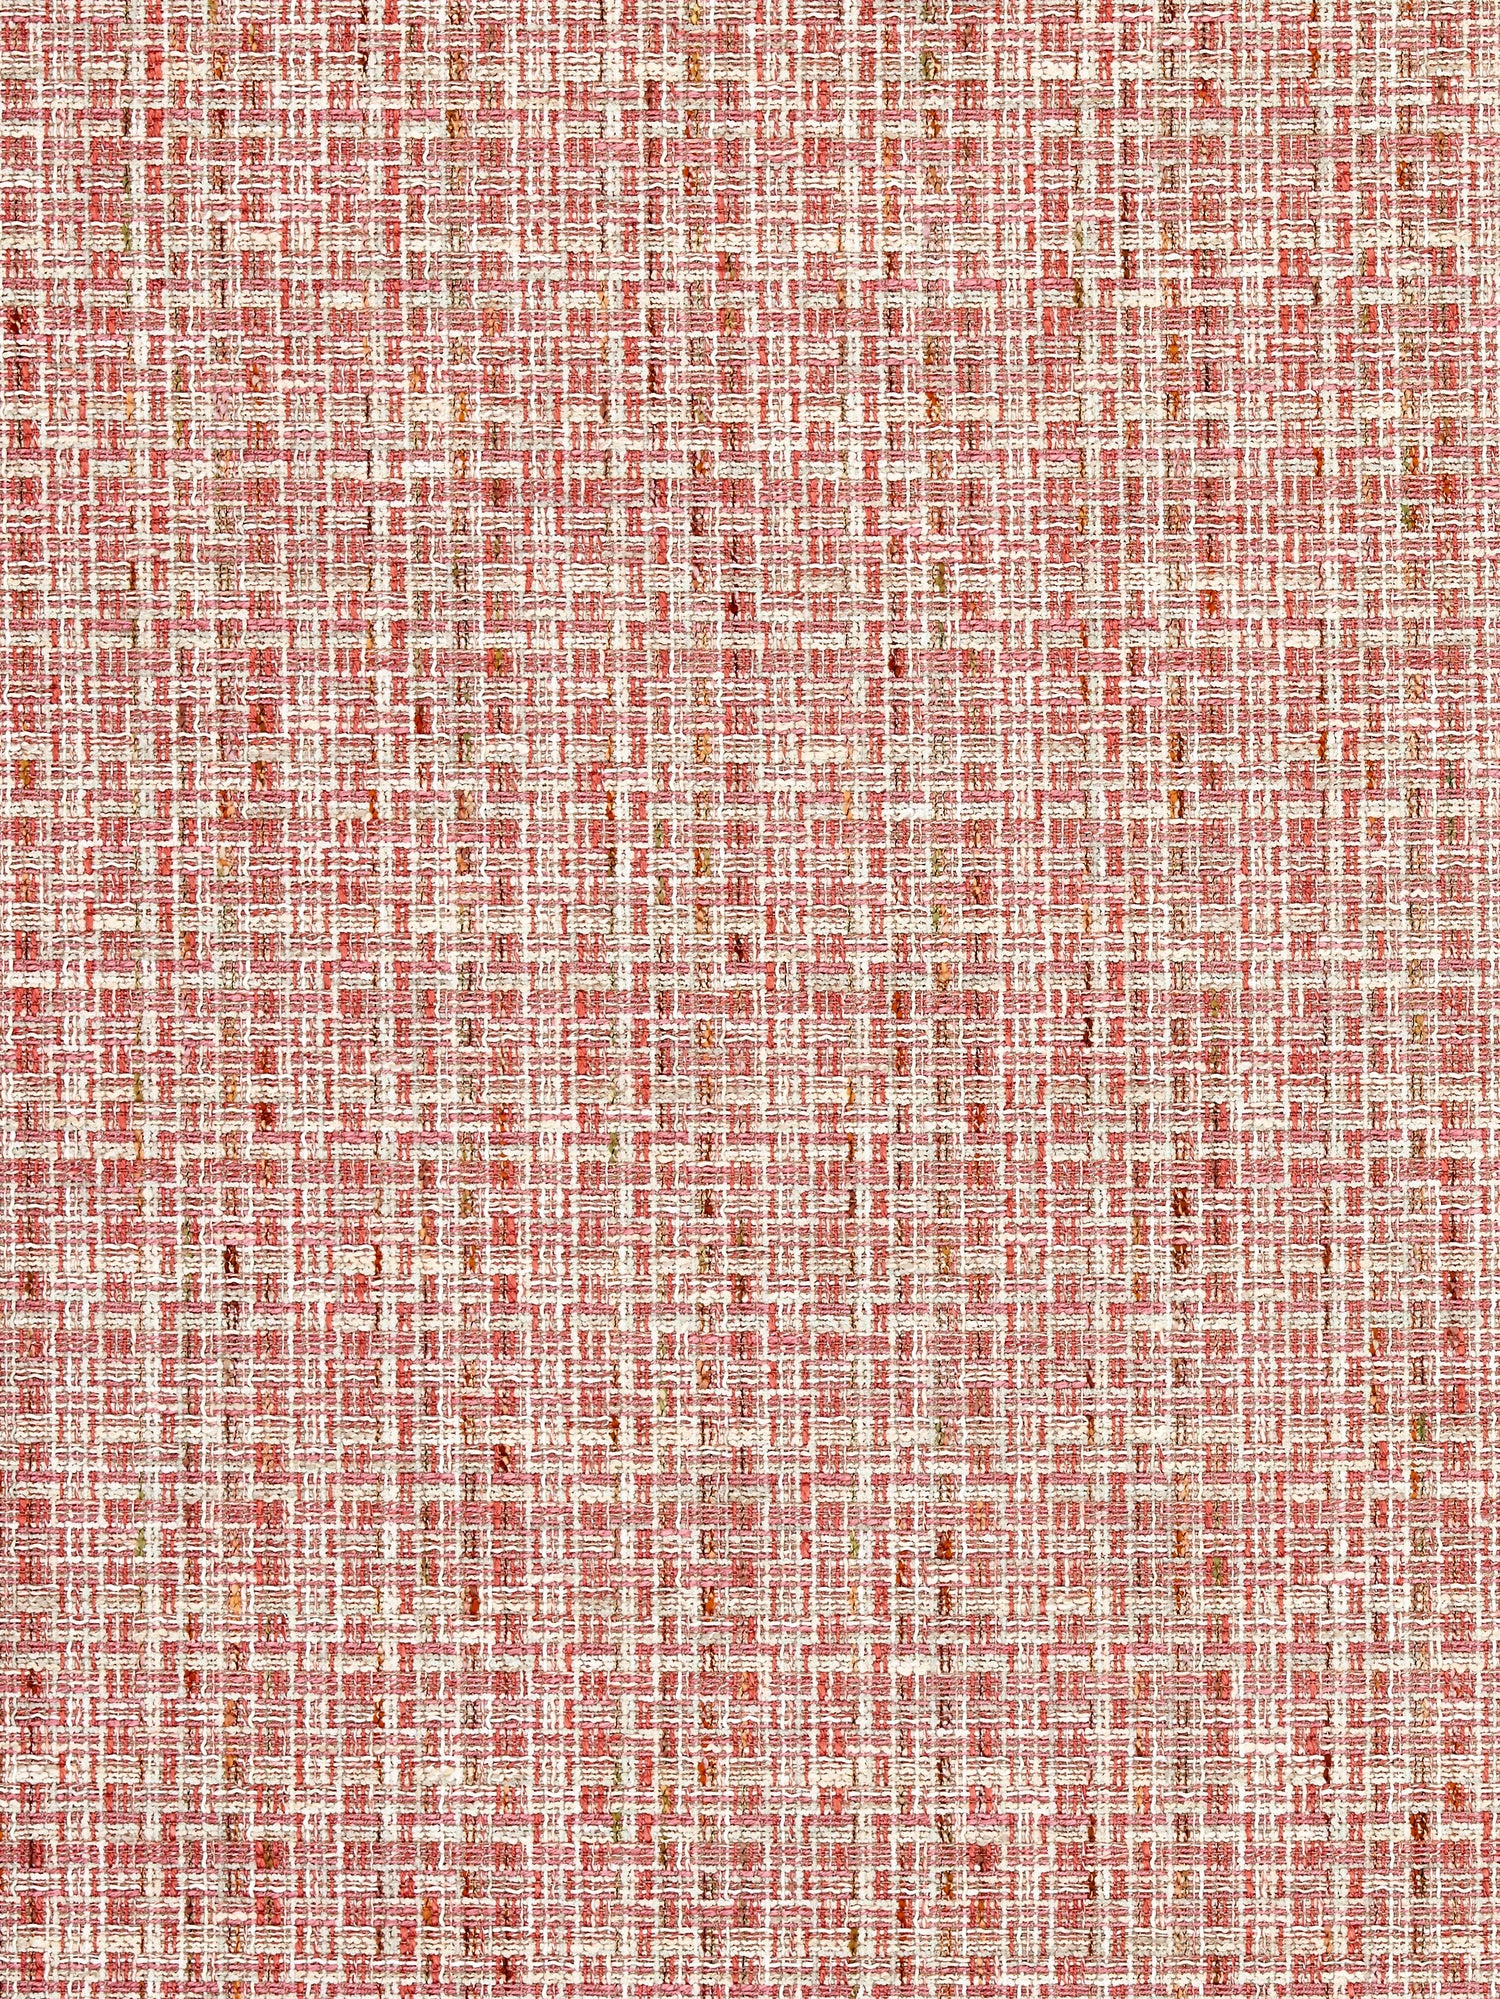 Faye fabric in petal color - pattern number BI 0006FAYE - by Scalamandre in the Old World Weavers collection